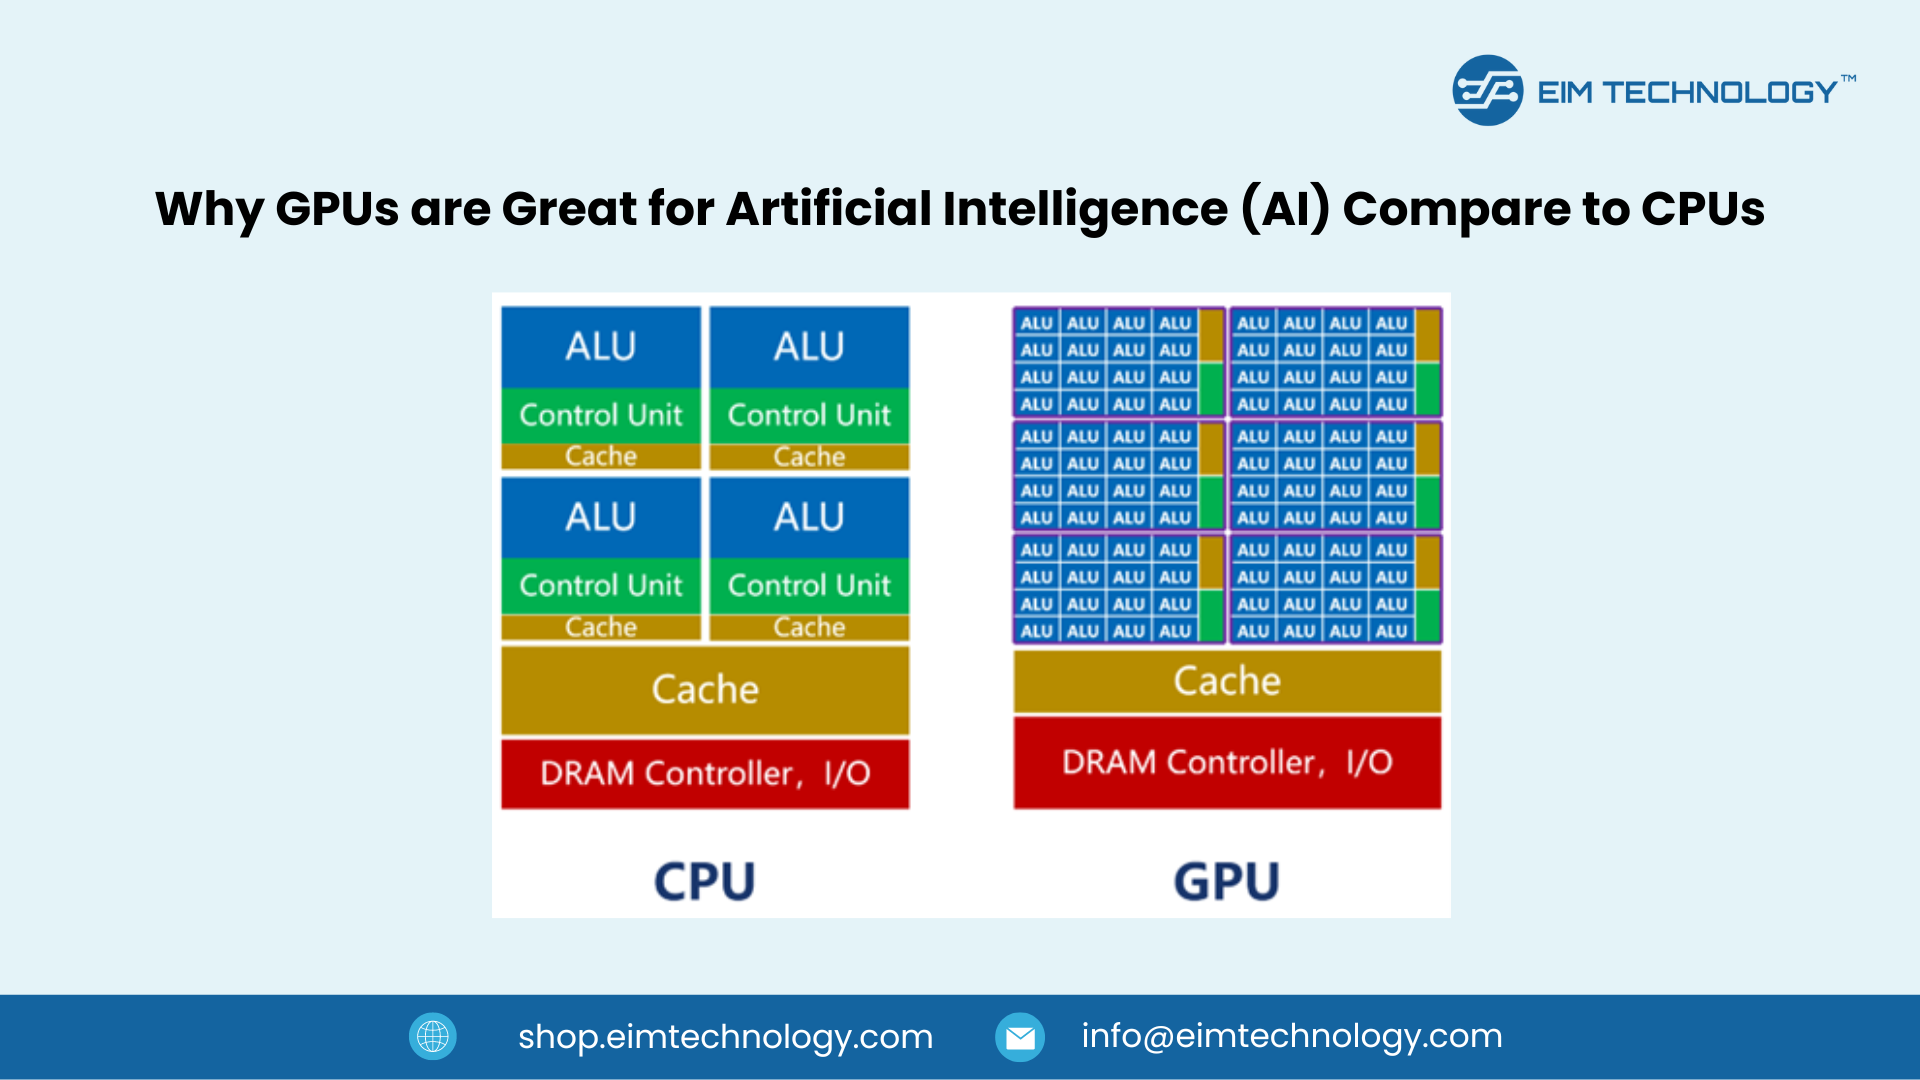 Why GPUs (Graphics Processing Units) are Great for AI (Artificial Intelligence) Compare to CPUs (Central Processing Units)